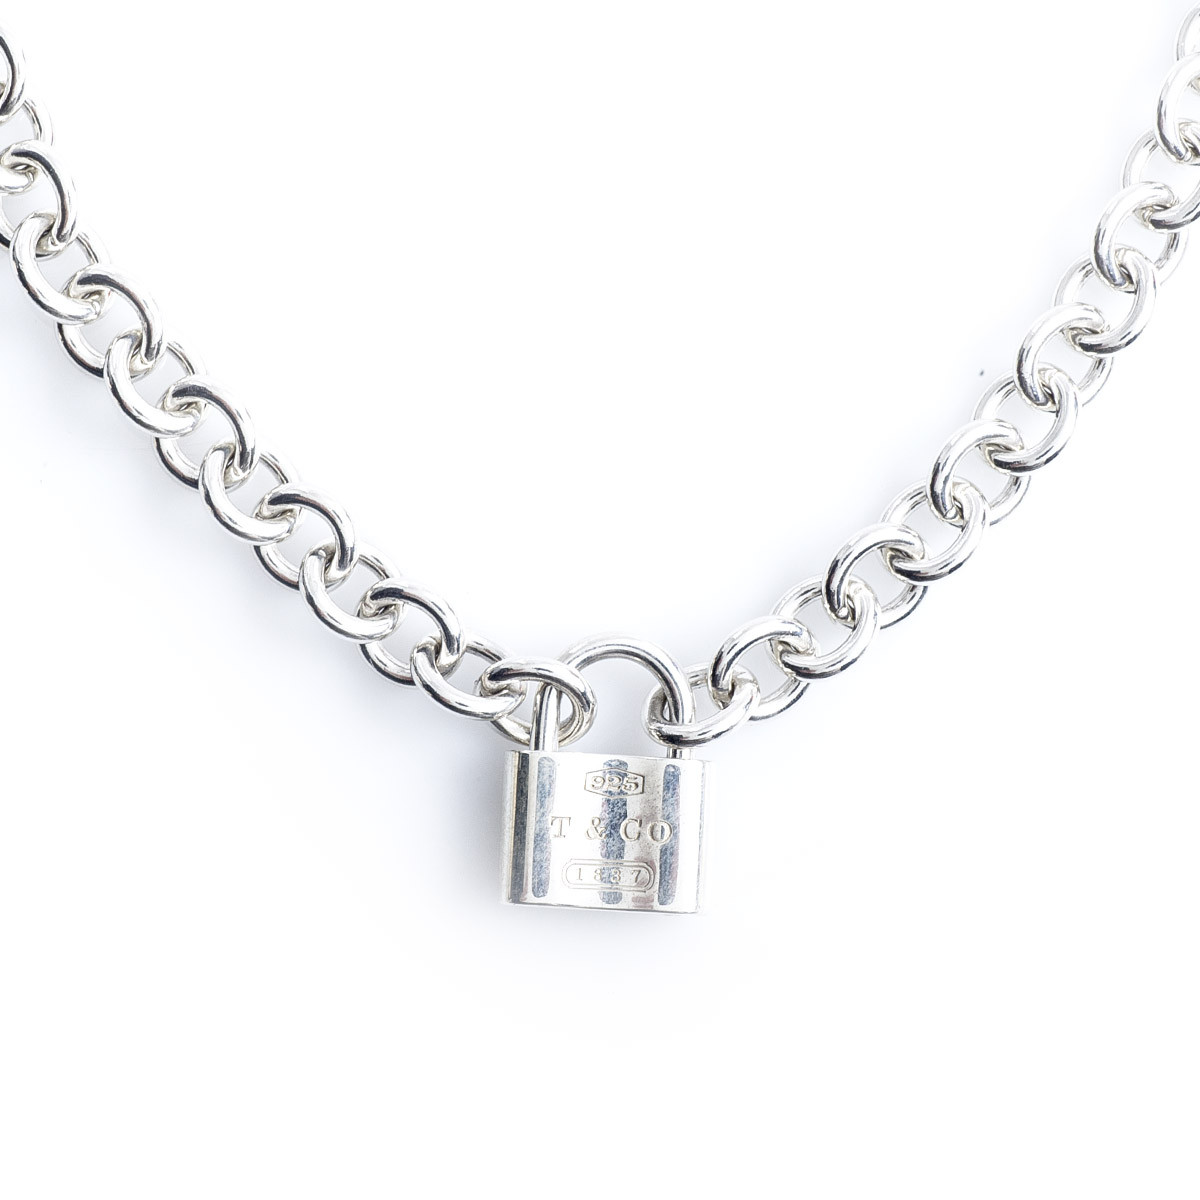 Sold at Auction: TIFFANY & CO PADLOCK NECKLACE STERLING SILVER LOCK